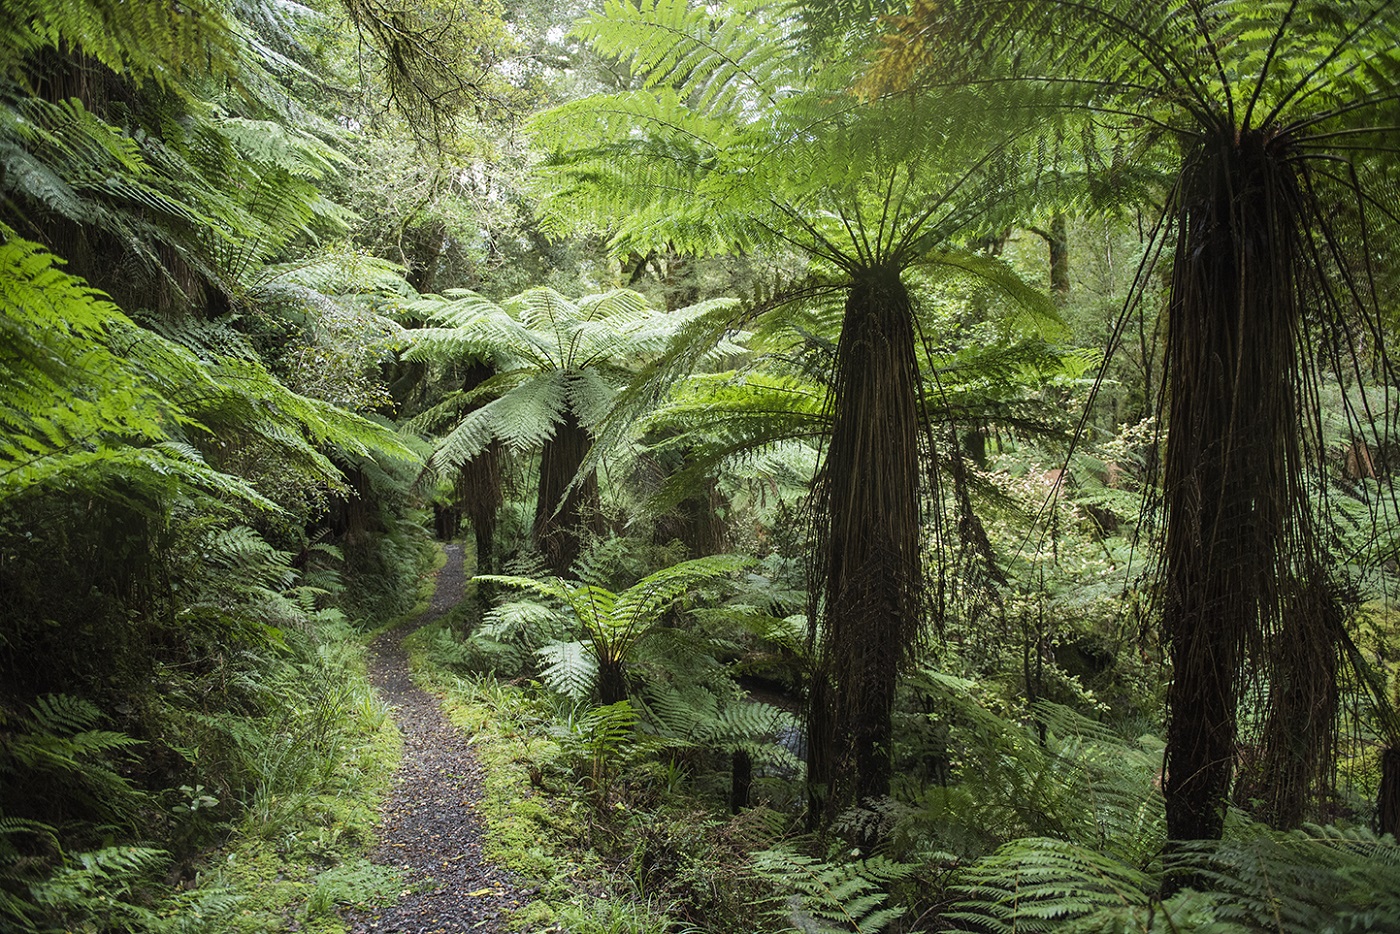 Hiking track through ferns in New Zealand